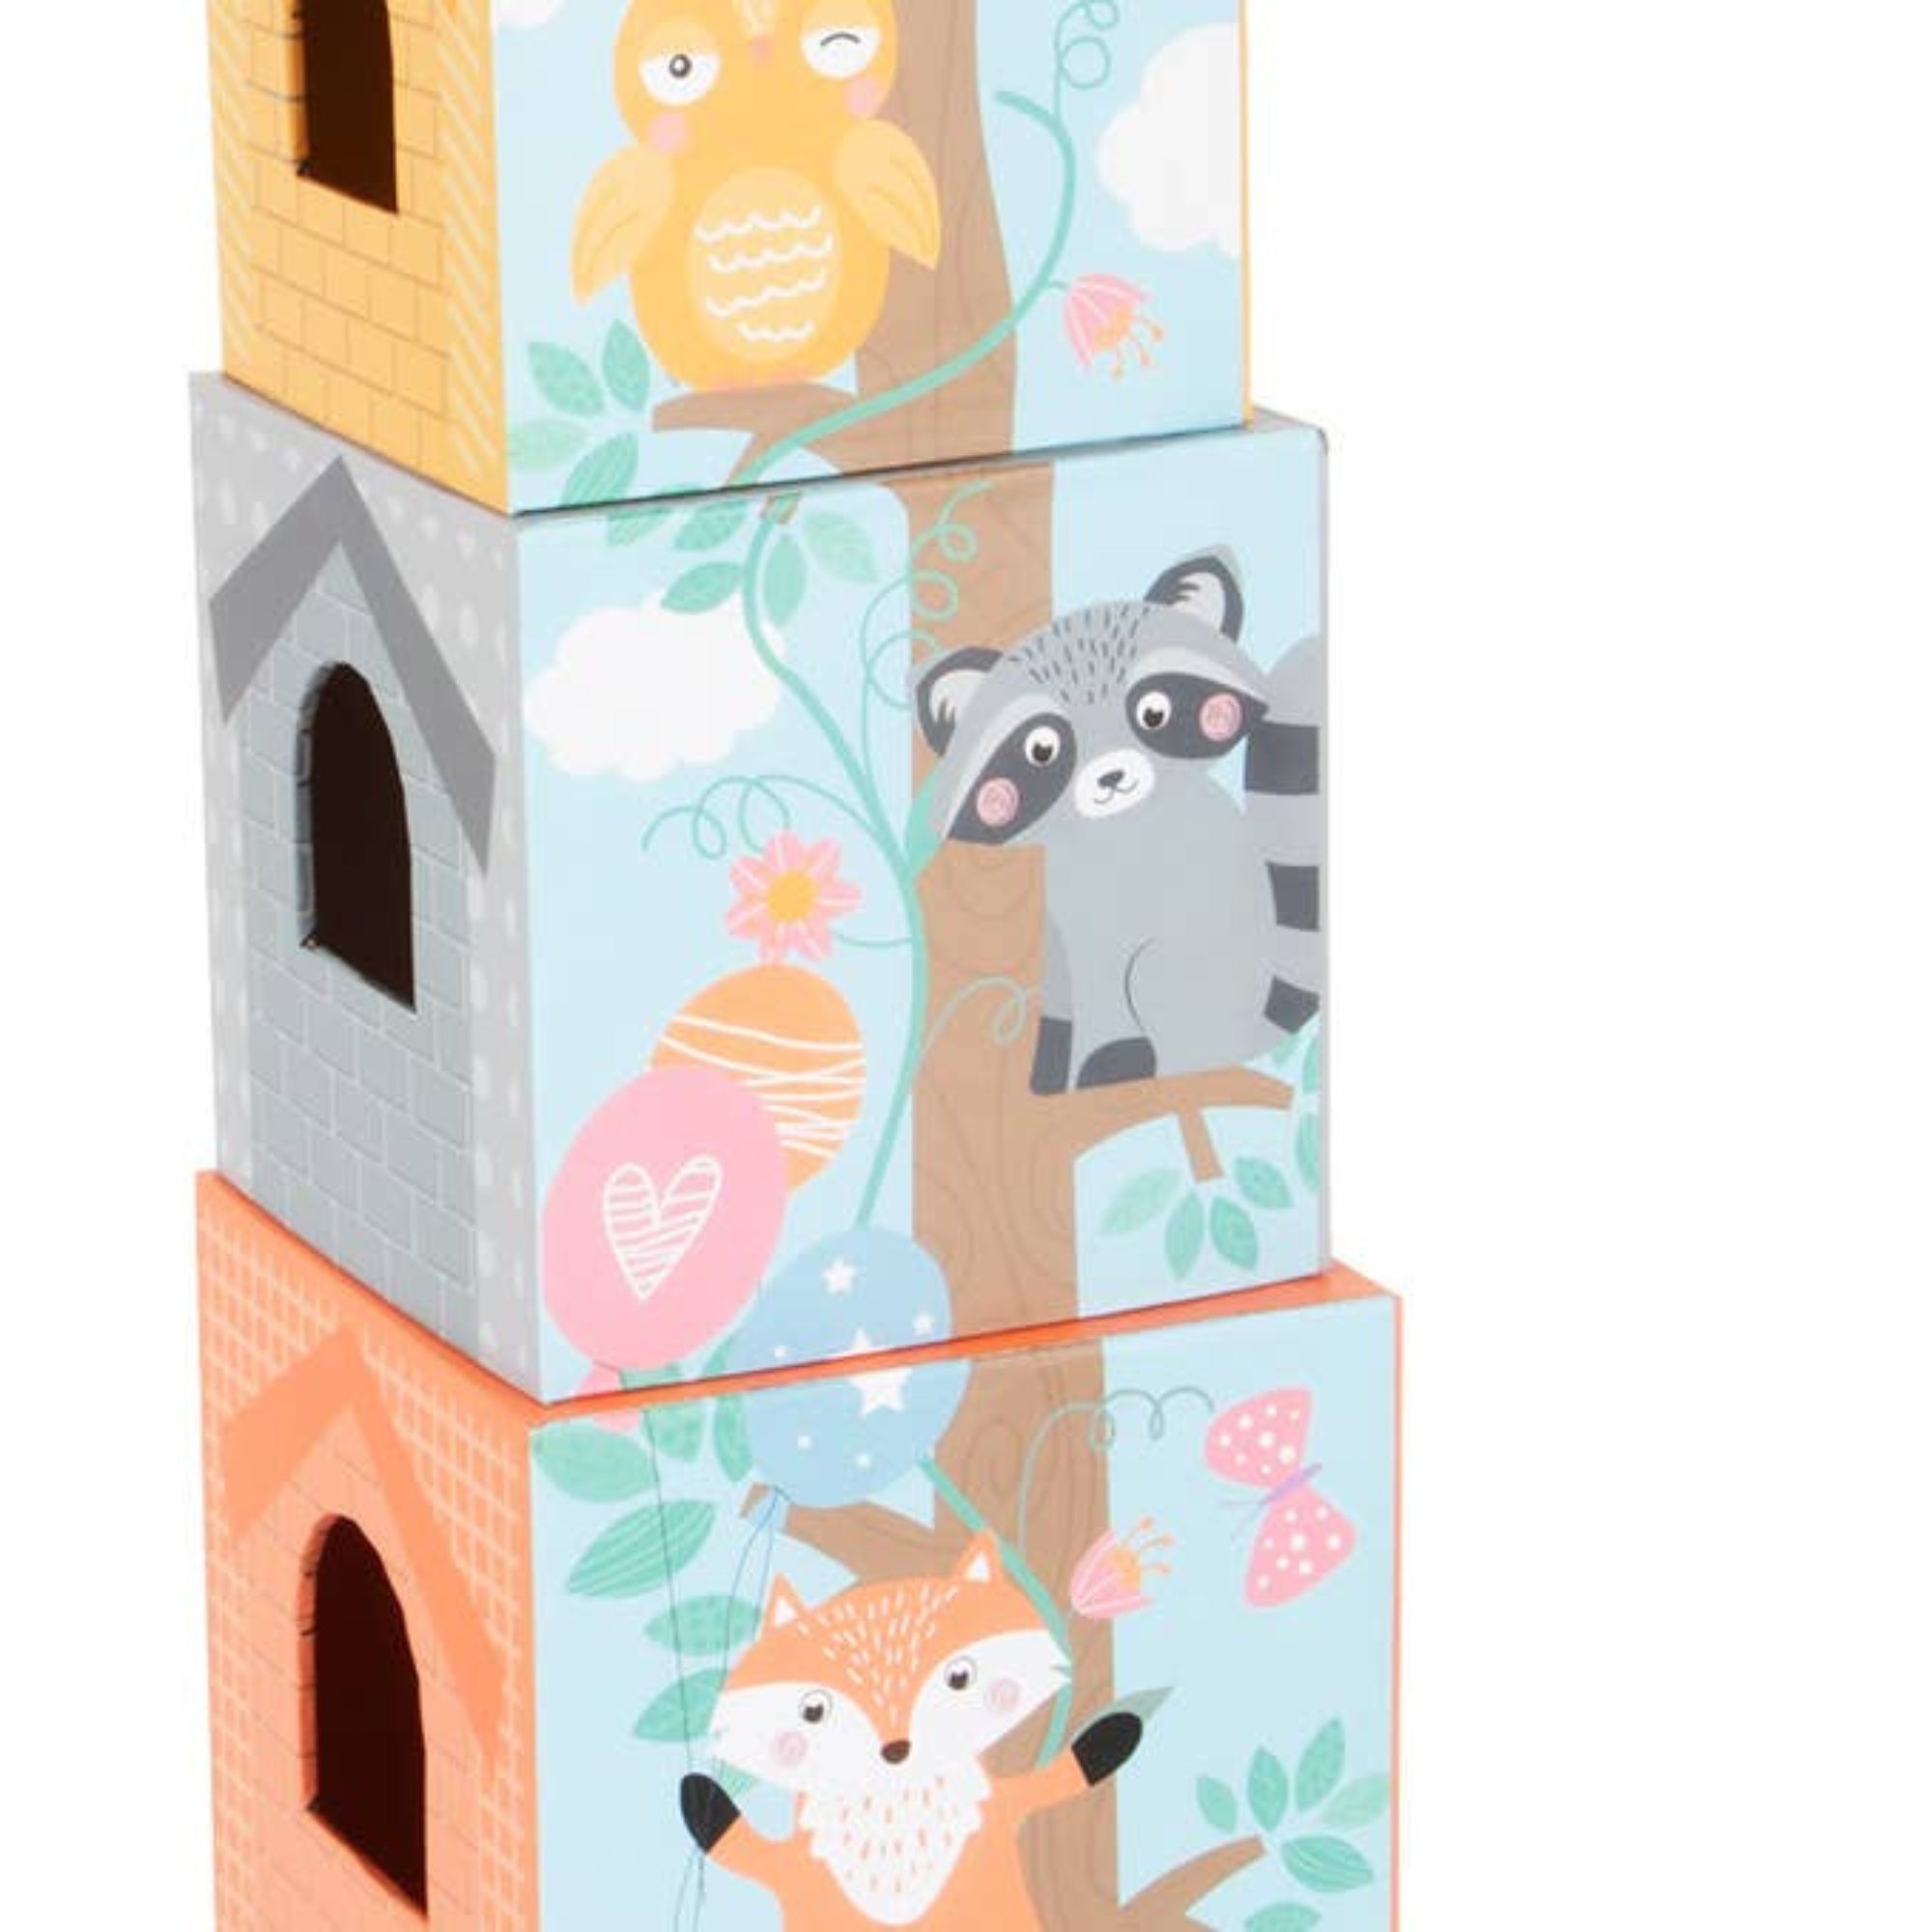 Stacking Tower Pastel, Introducing our Stacking Tower Pastel set, perfect for children looking to learn and have fun at the same time! The Stacking Tower Pastel set includes five pastel-coloured stacking cubes made of sturdy cardboard, along with matching wooden animal figures. Each cube has playful illustrations that guide children to stack them in the correct sequence. Four of the cubes also have door and window openings, providing extra fun for little ones to hide their animal figures.To make learning ev